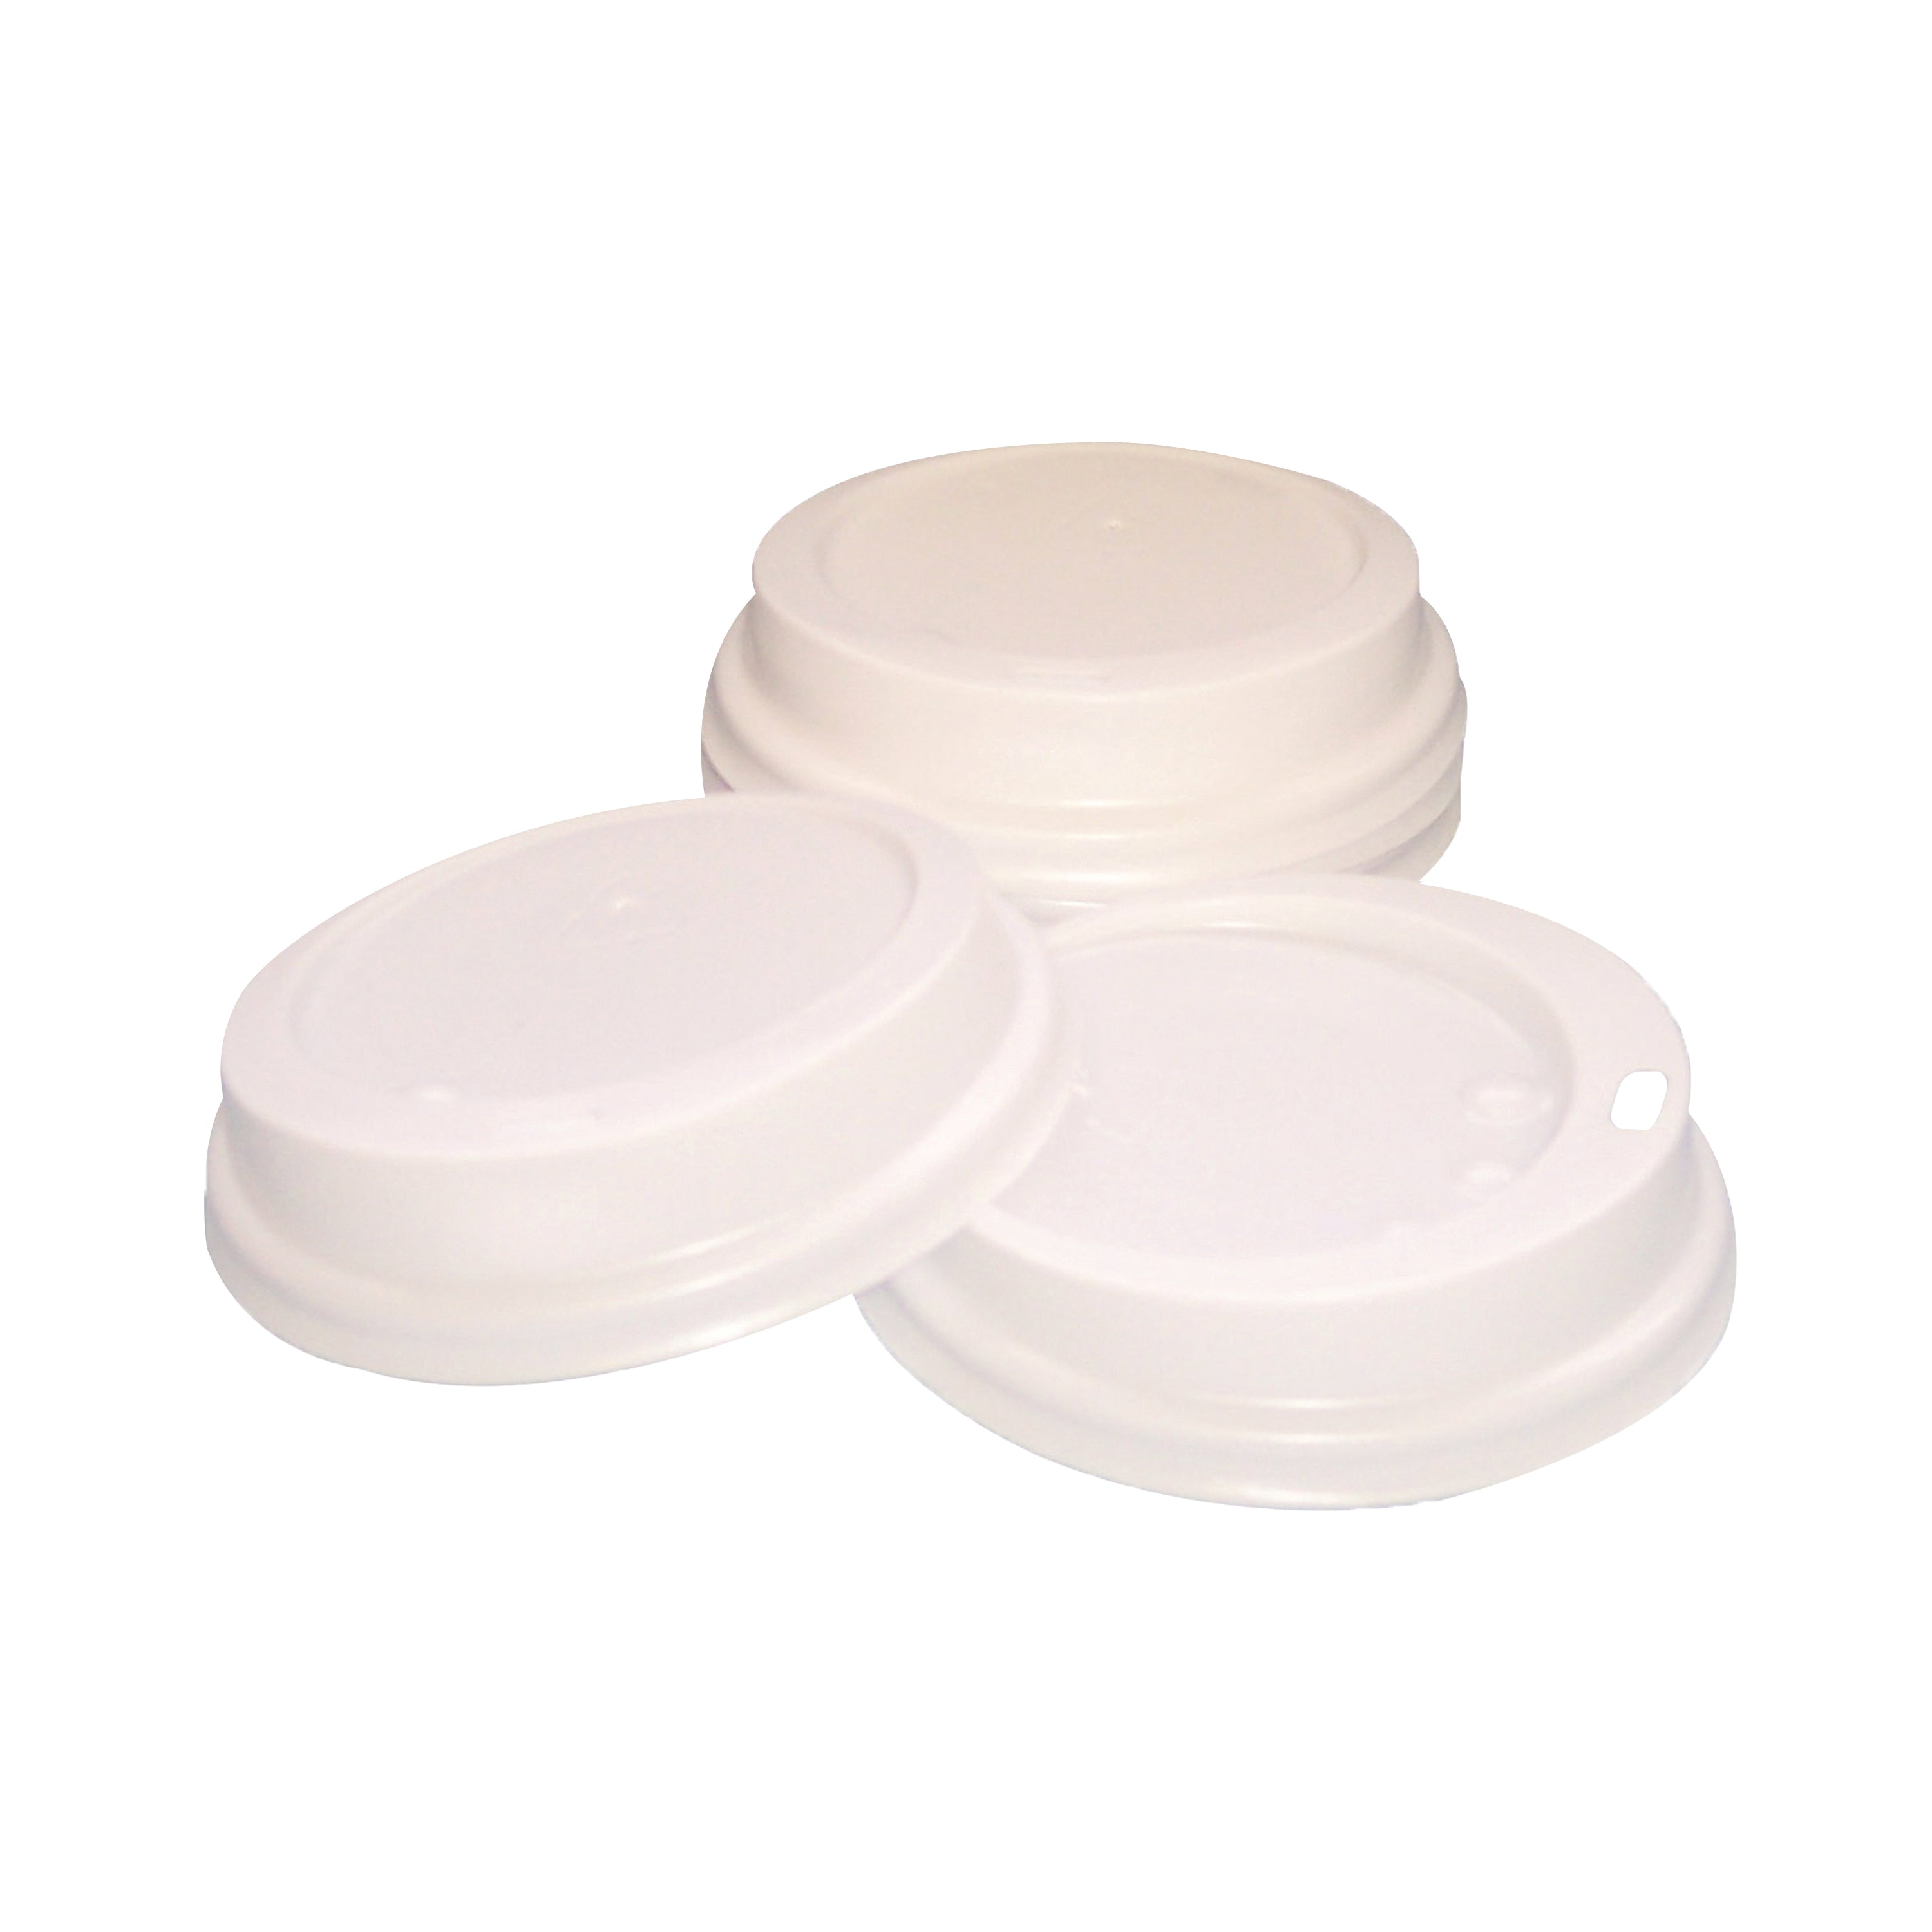 Caterpack 35cl Paper Cup Sip Lids White (Pack of 100) MXPWL90